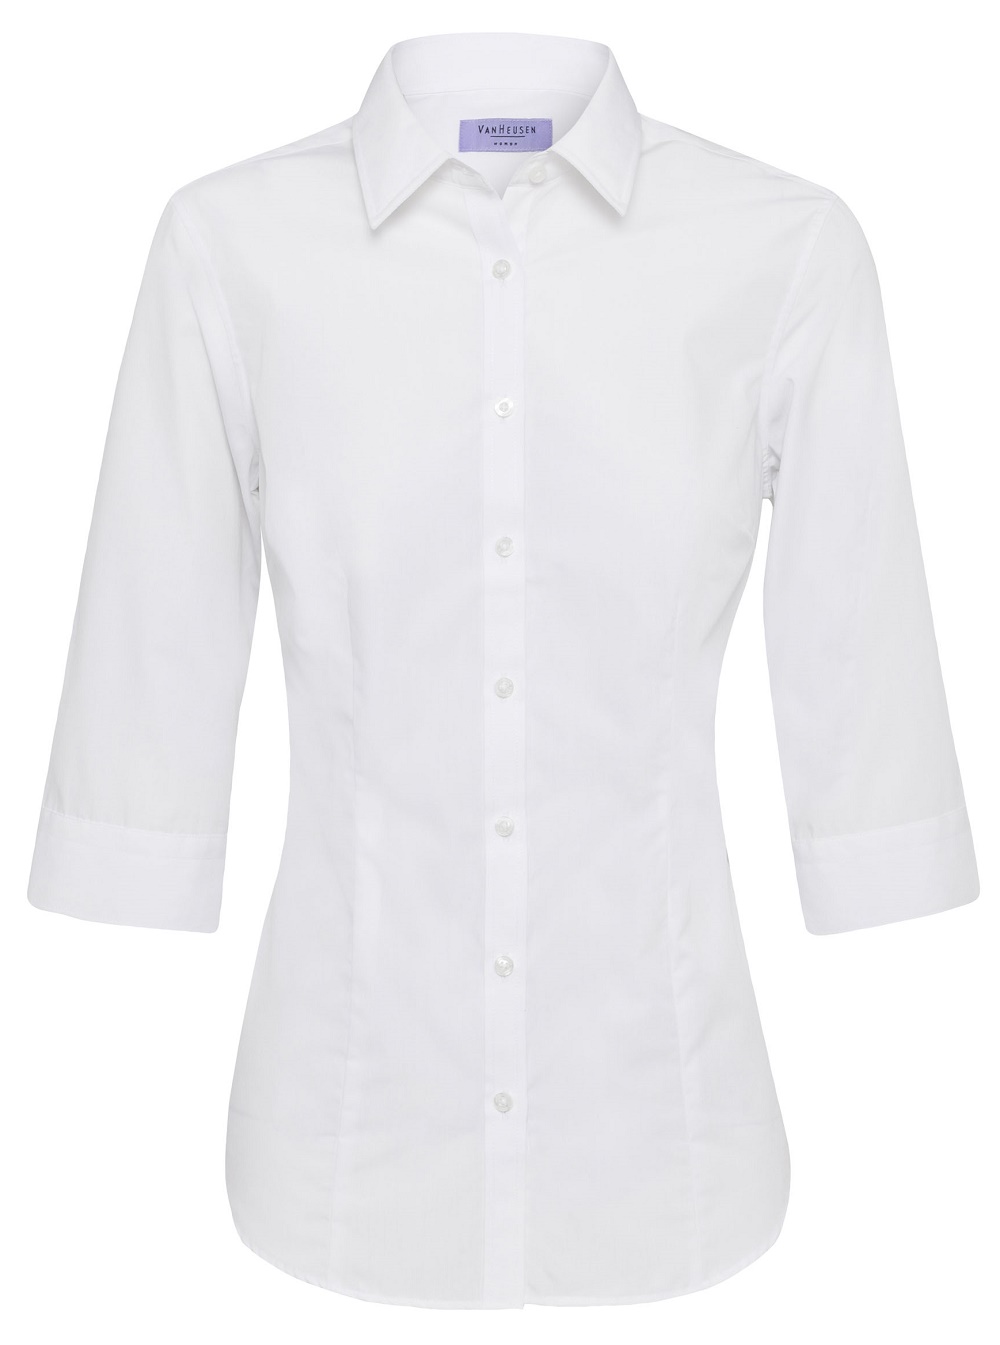 Womens Business Shirts by Van Heusen Shirts Save up to 25%